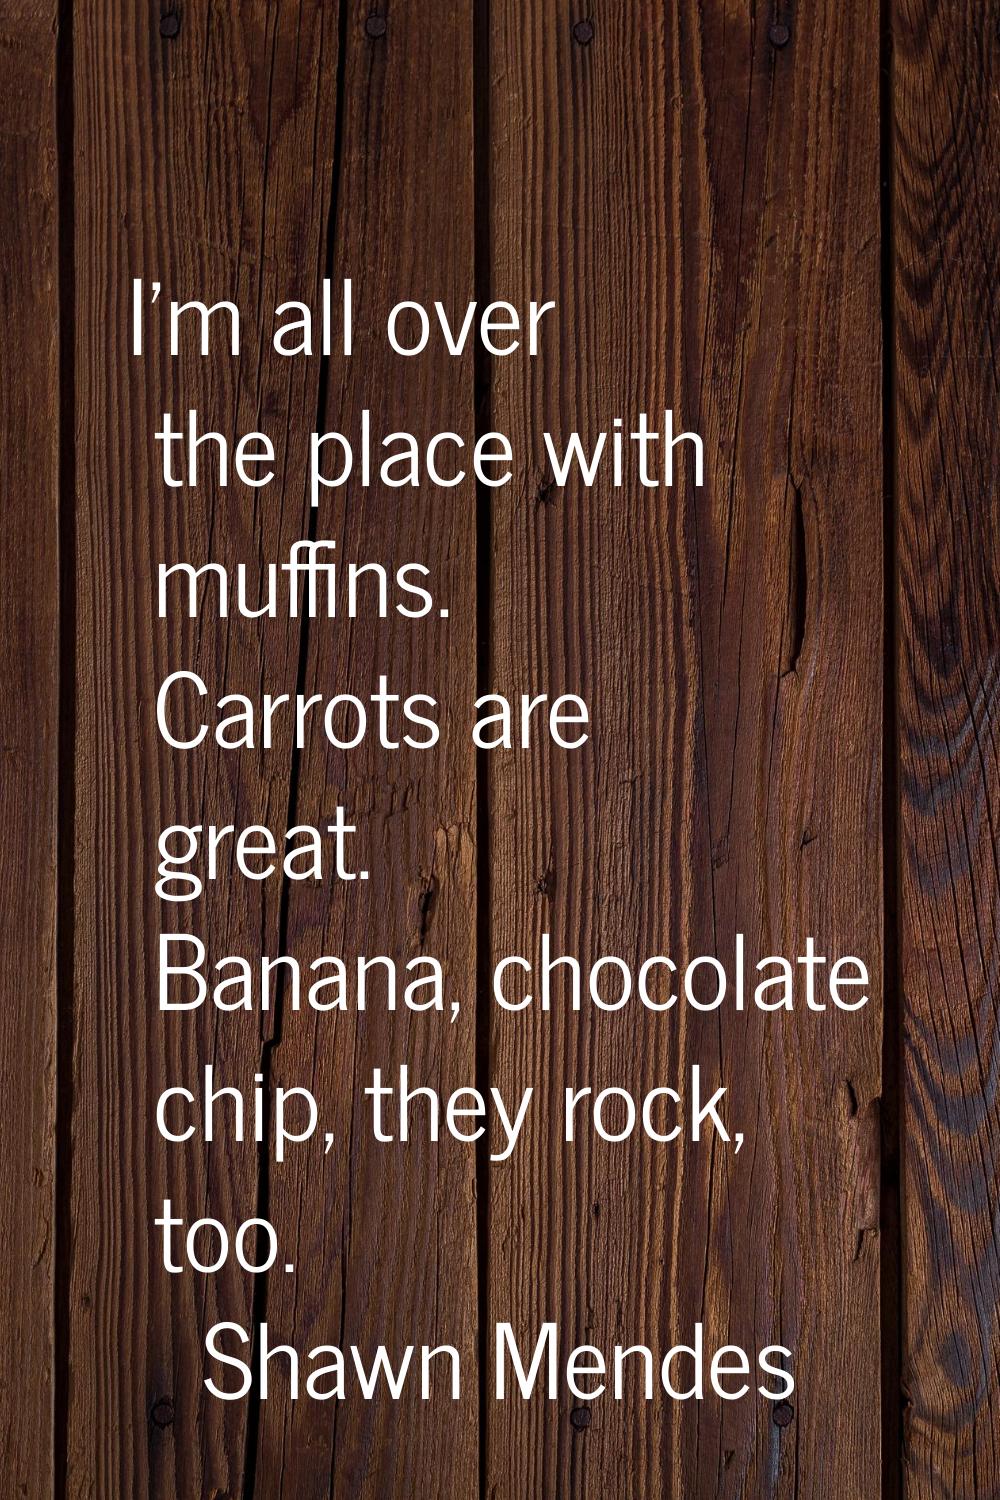 I'm all over the place with muffins. Carrots are great. Banana, chocolate chip, they rock, too.